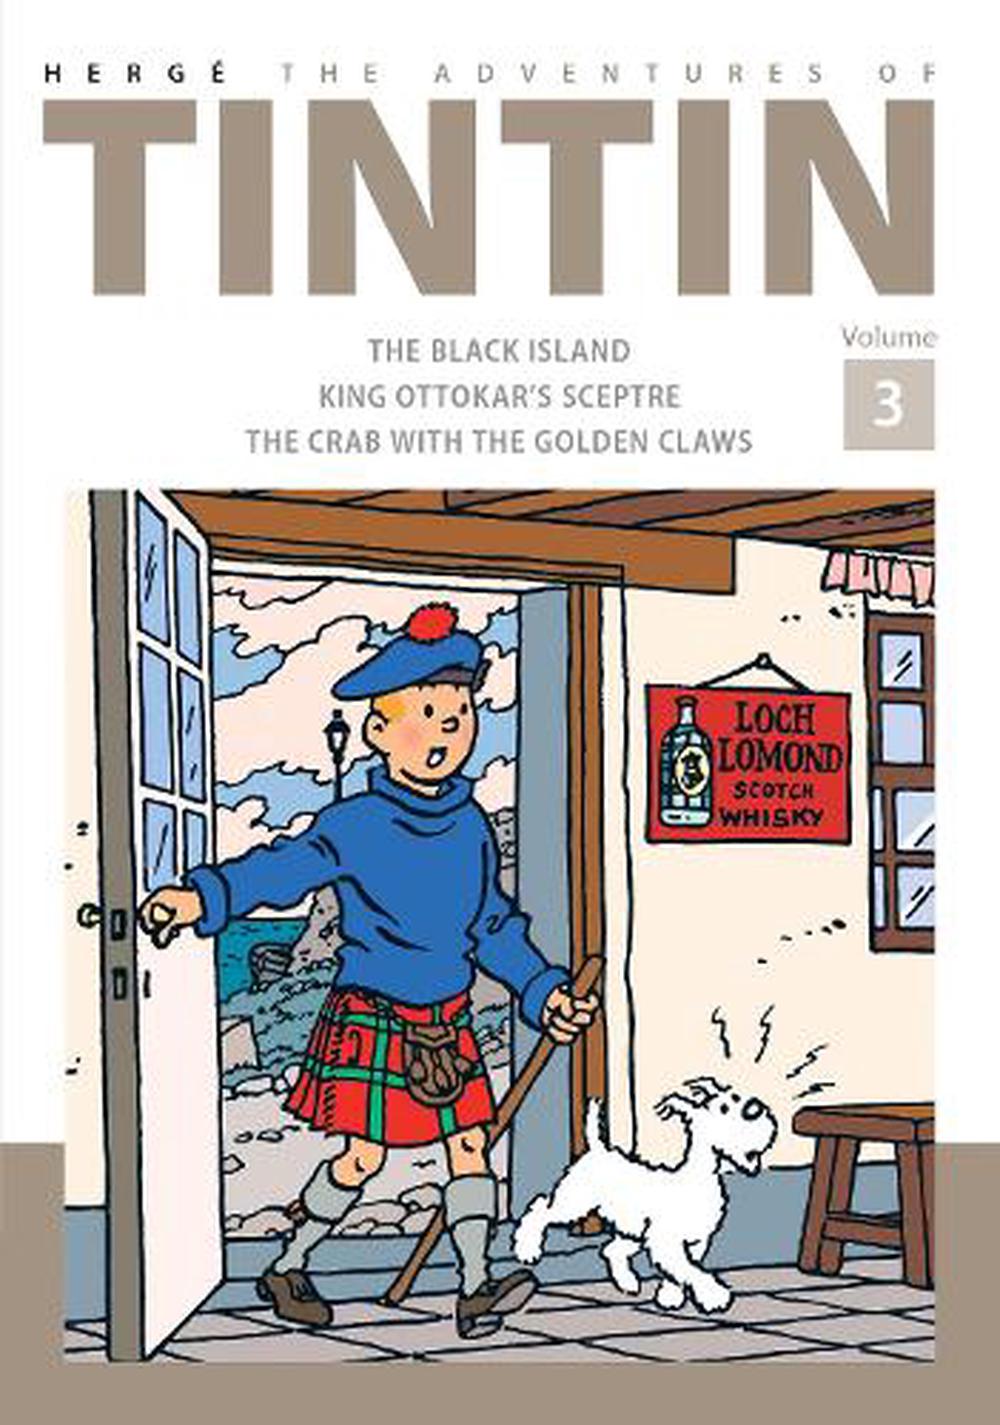 Adventures Of Tintin Volume 3 By Herge English Hardcover Book Free Shipping 9781405282772 Ebay 